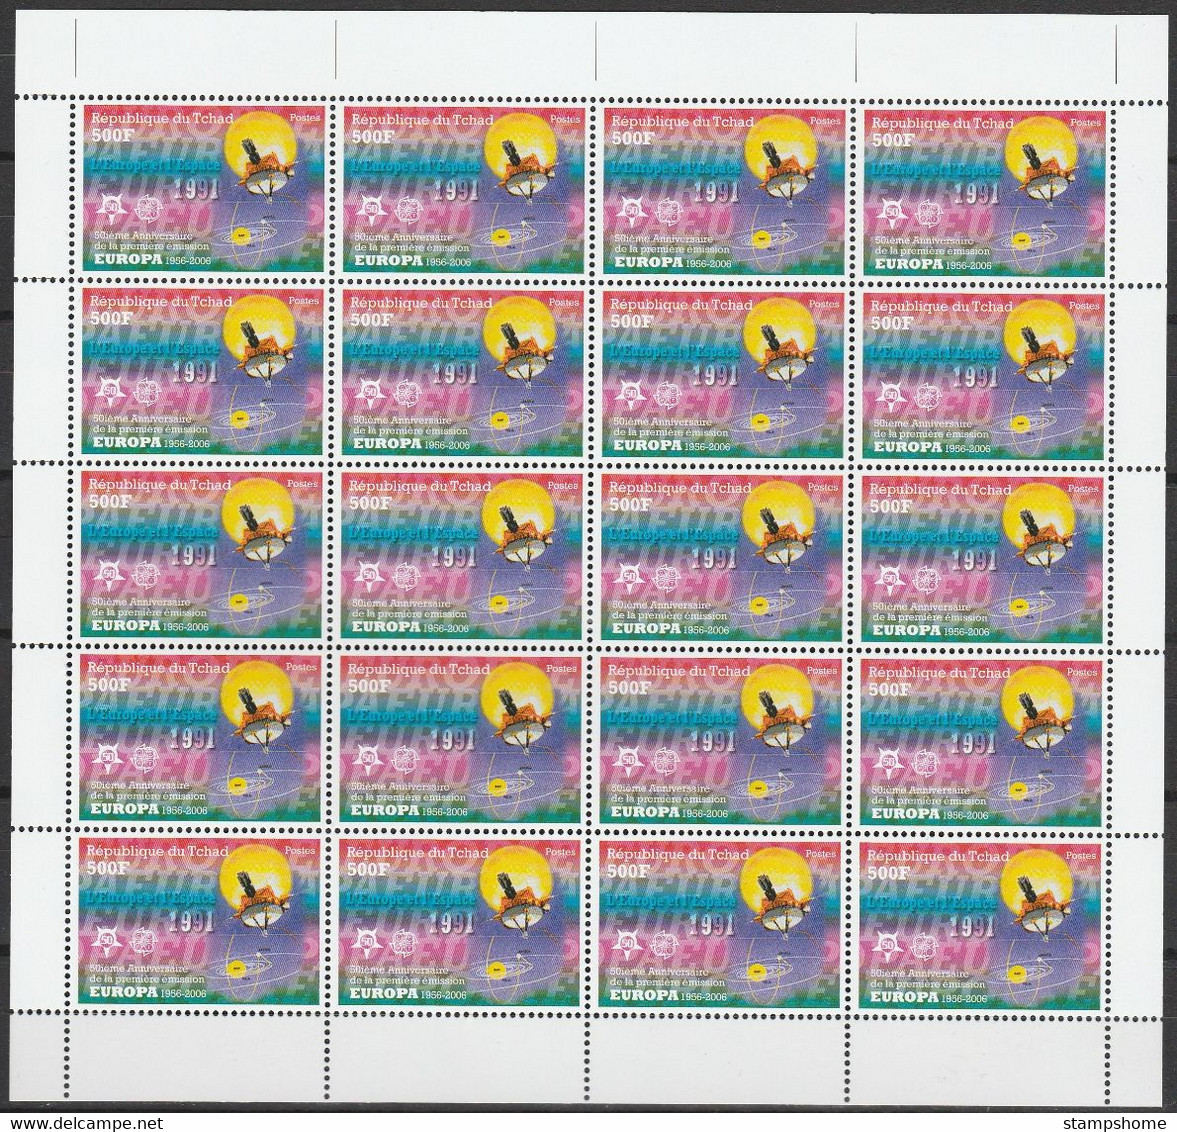 Europa Cept - 2005 - Tchad, Chad - 8.Complete Sheetlet of 20 set - (perf.) ** MNH